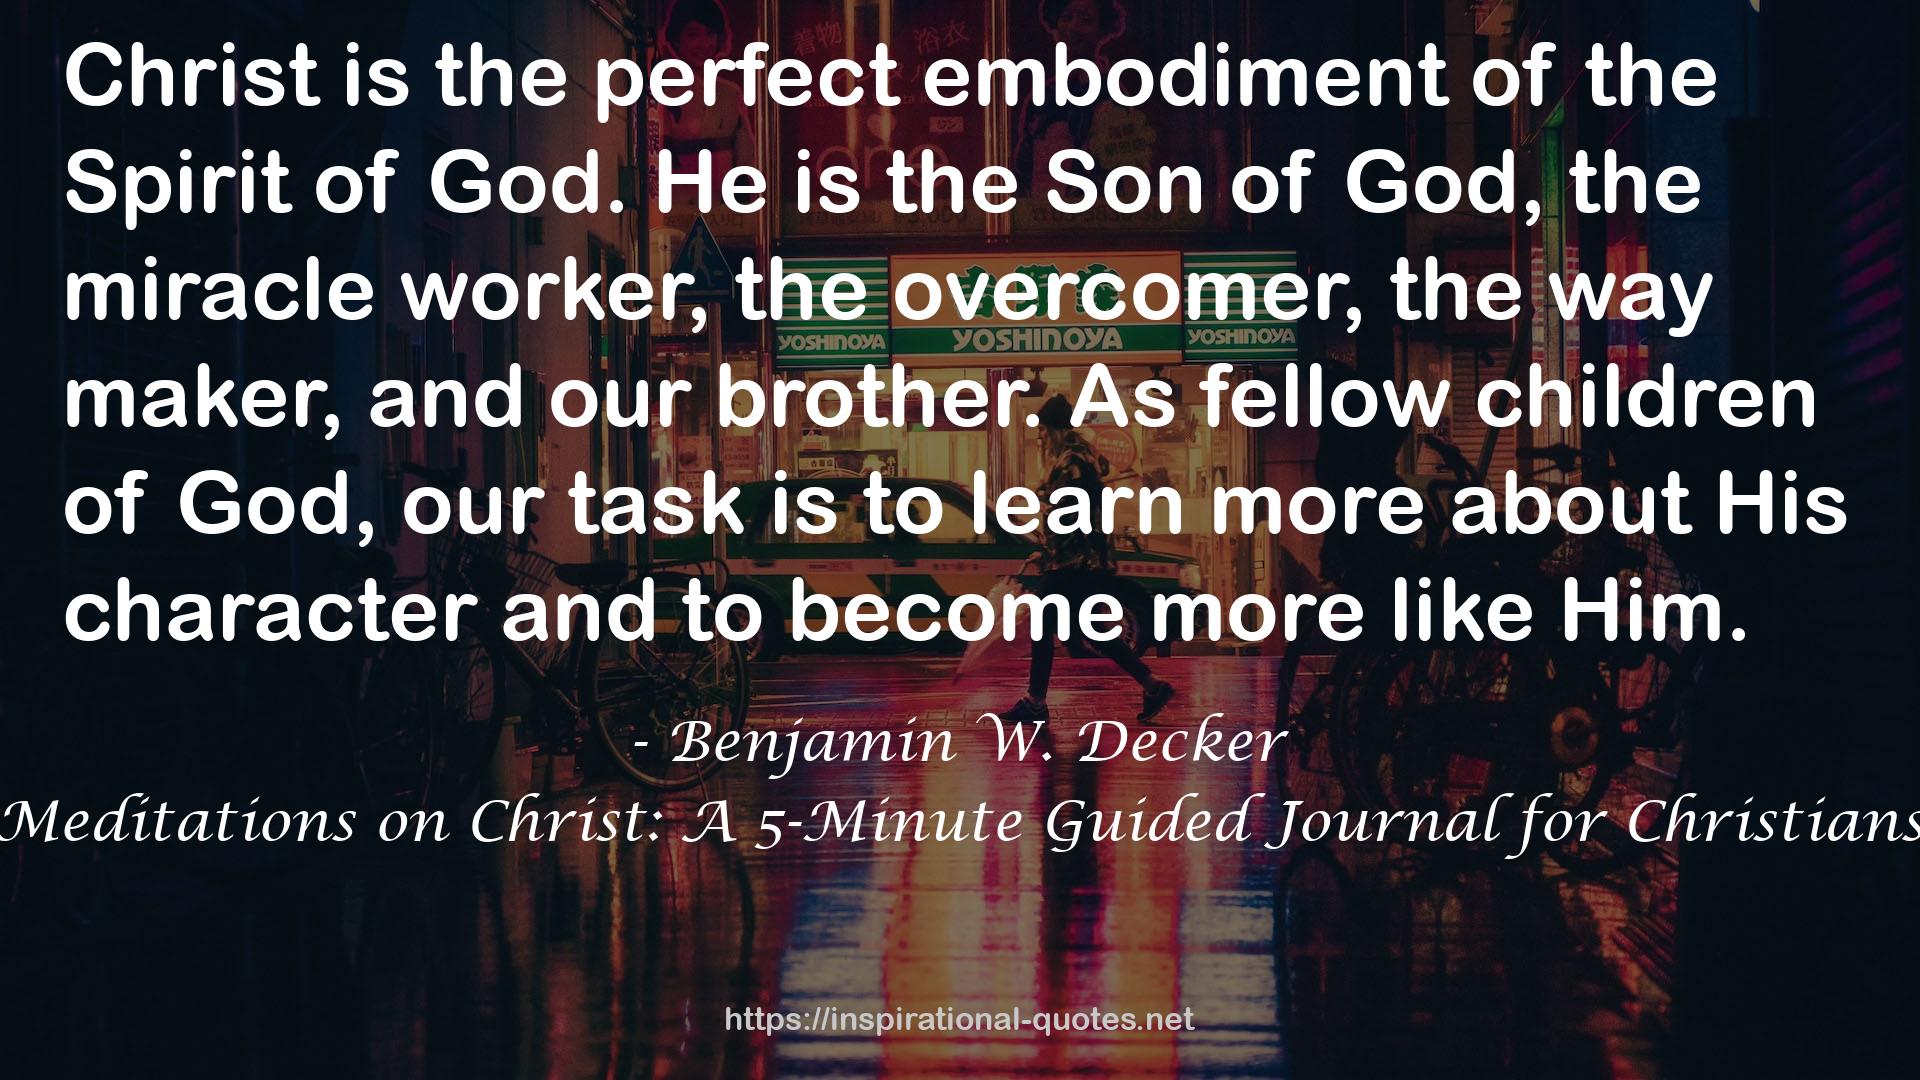 Meditations on Christ: A 5-Minute Guided Journal for Christians QUOTES